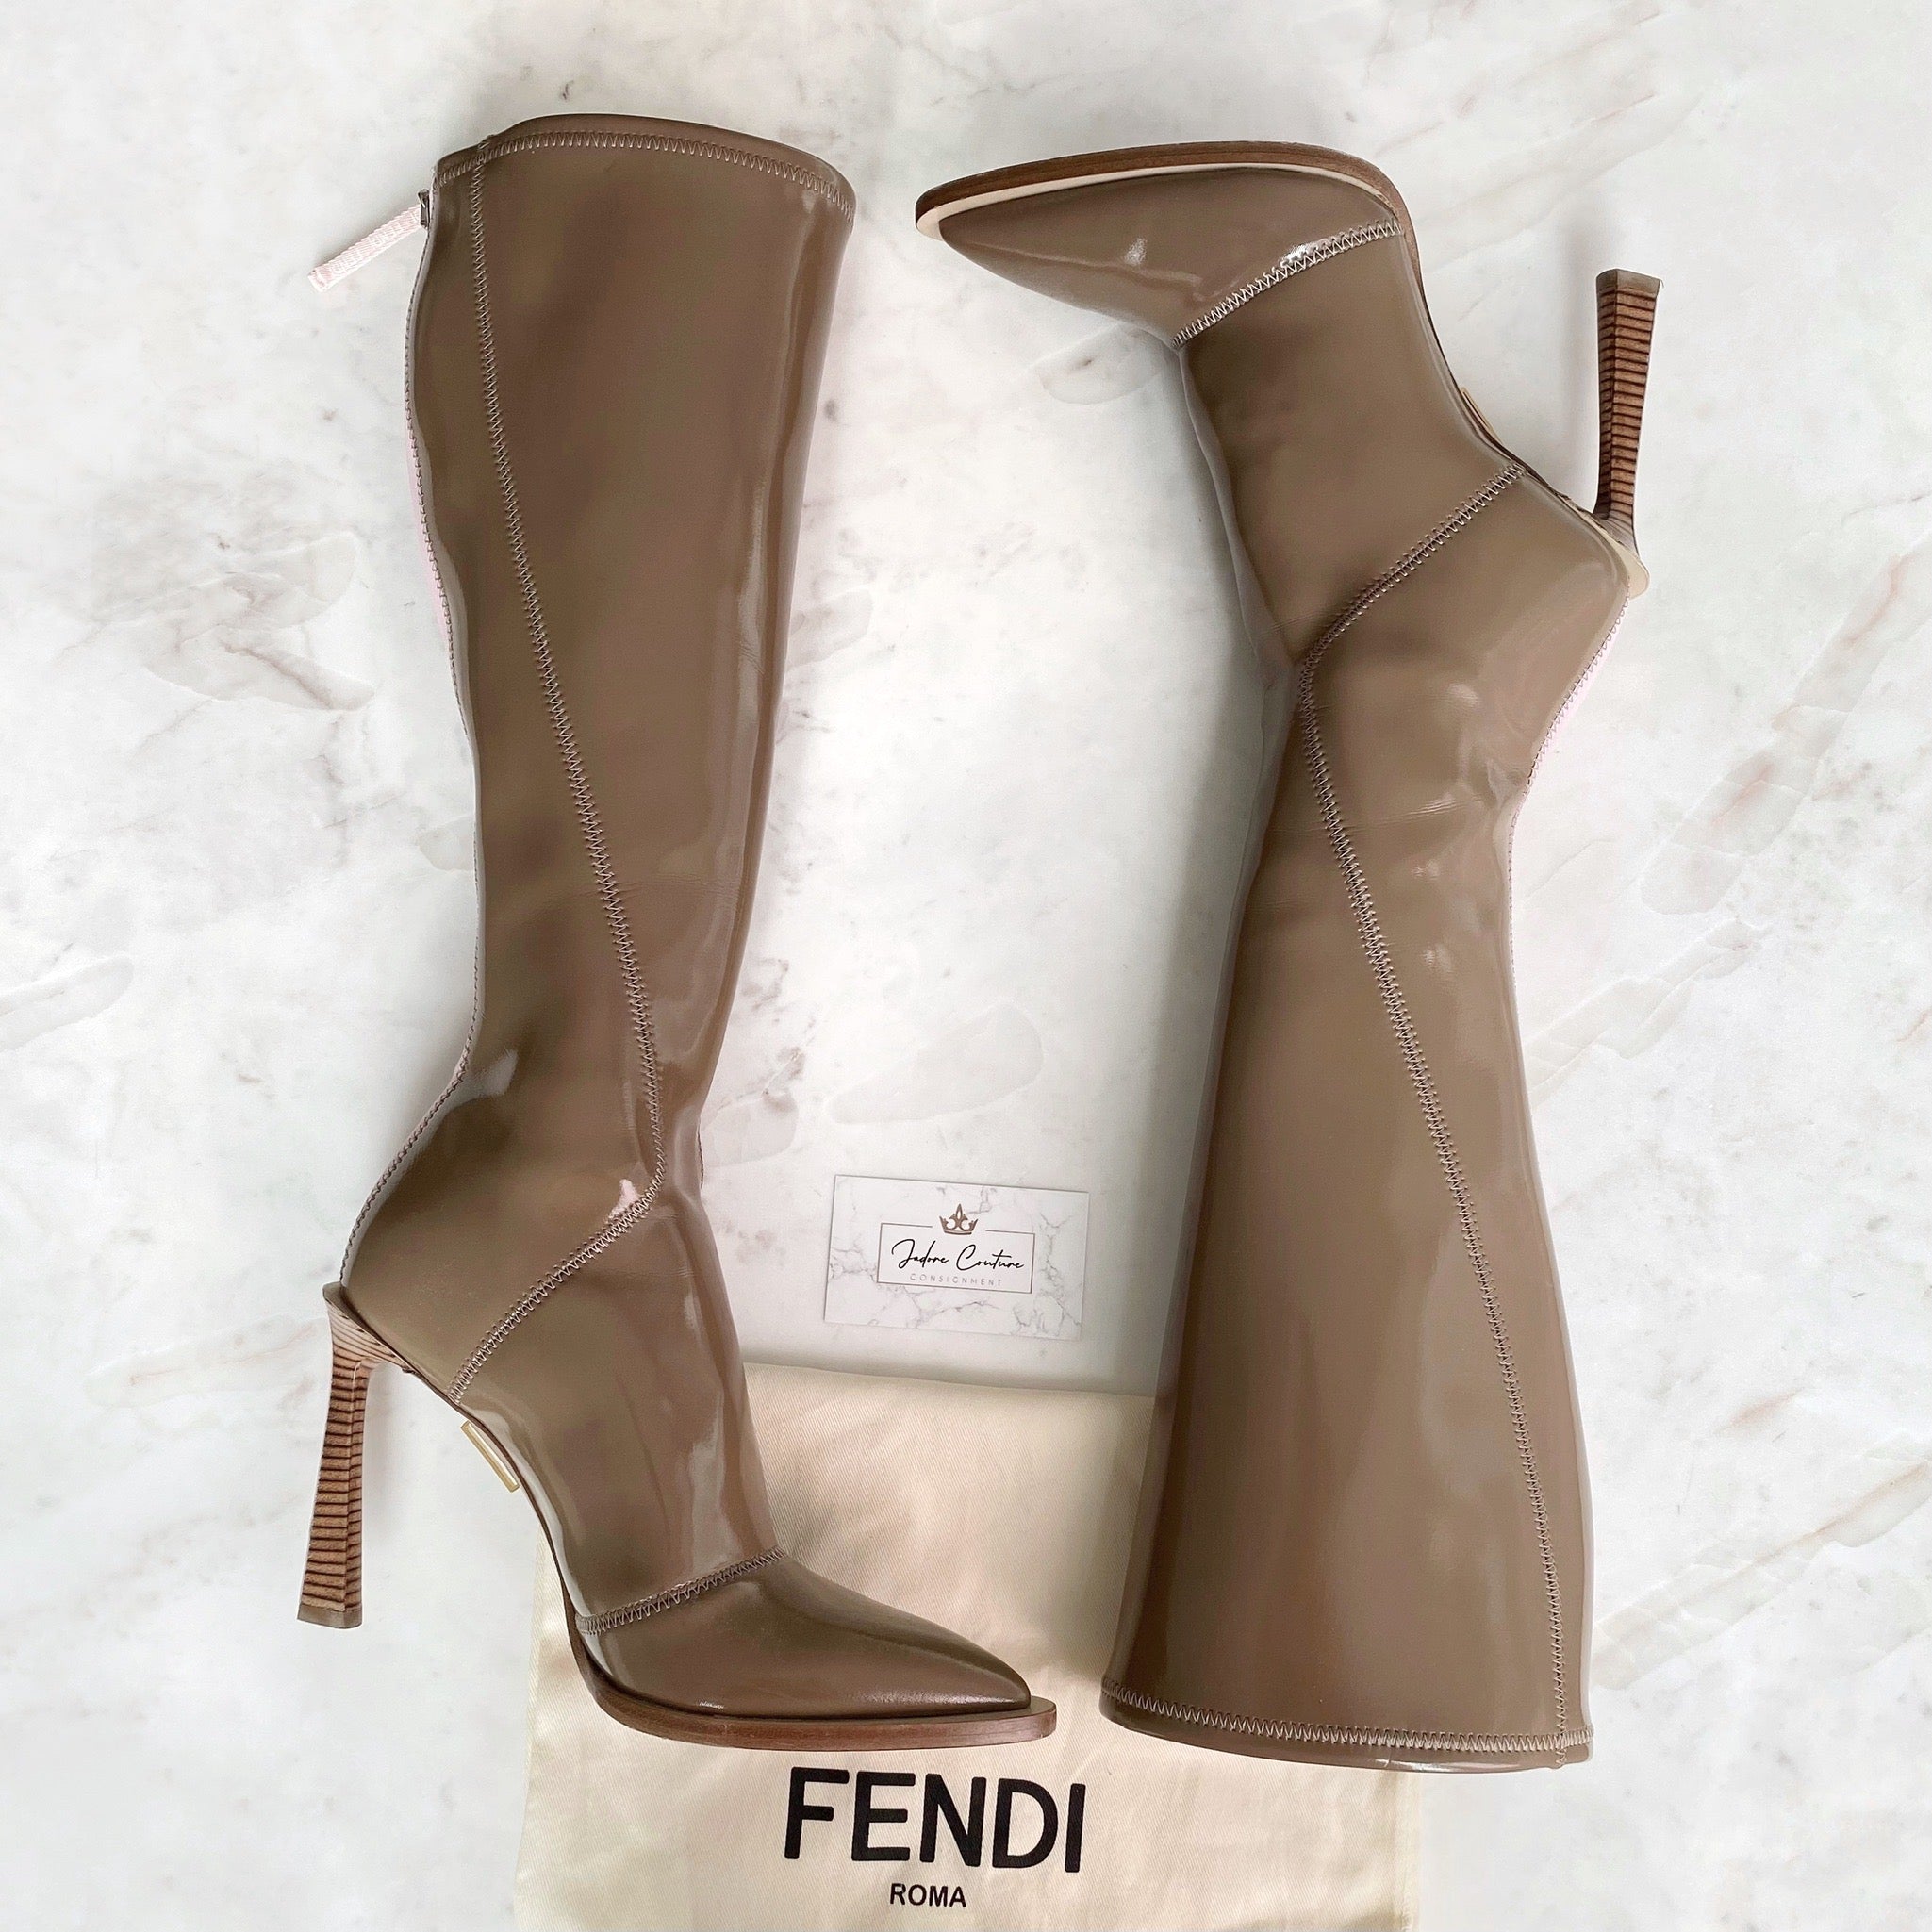 Fendi Taupe Knee High Boots 105mm 39.5